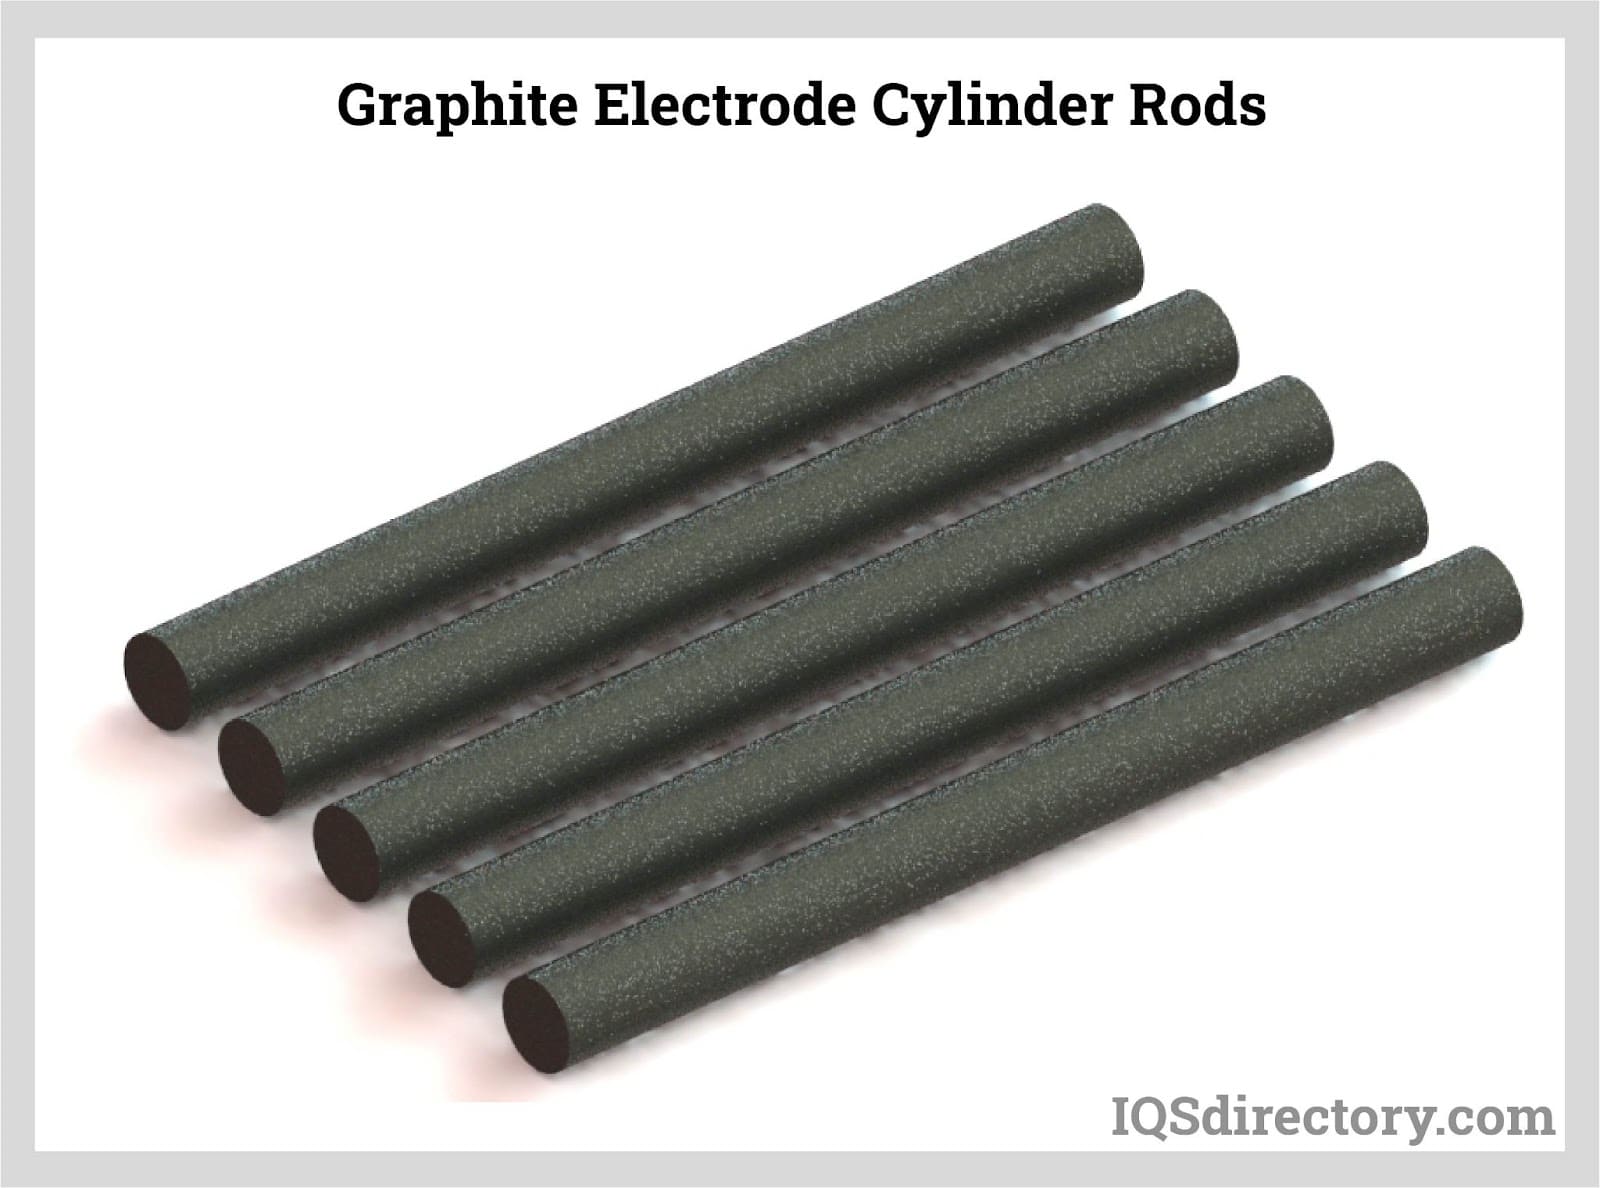 Graphite - Definition, Structures, Applications, Properties, Use